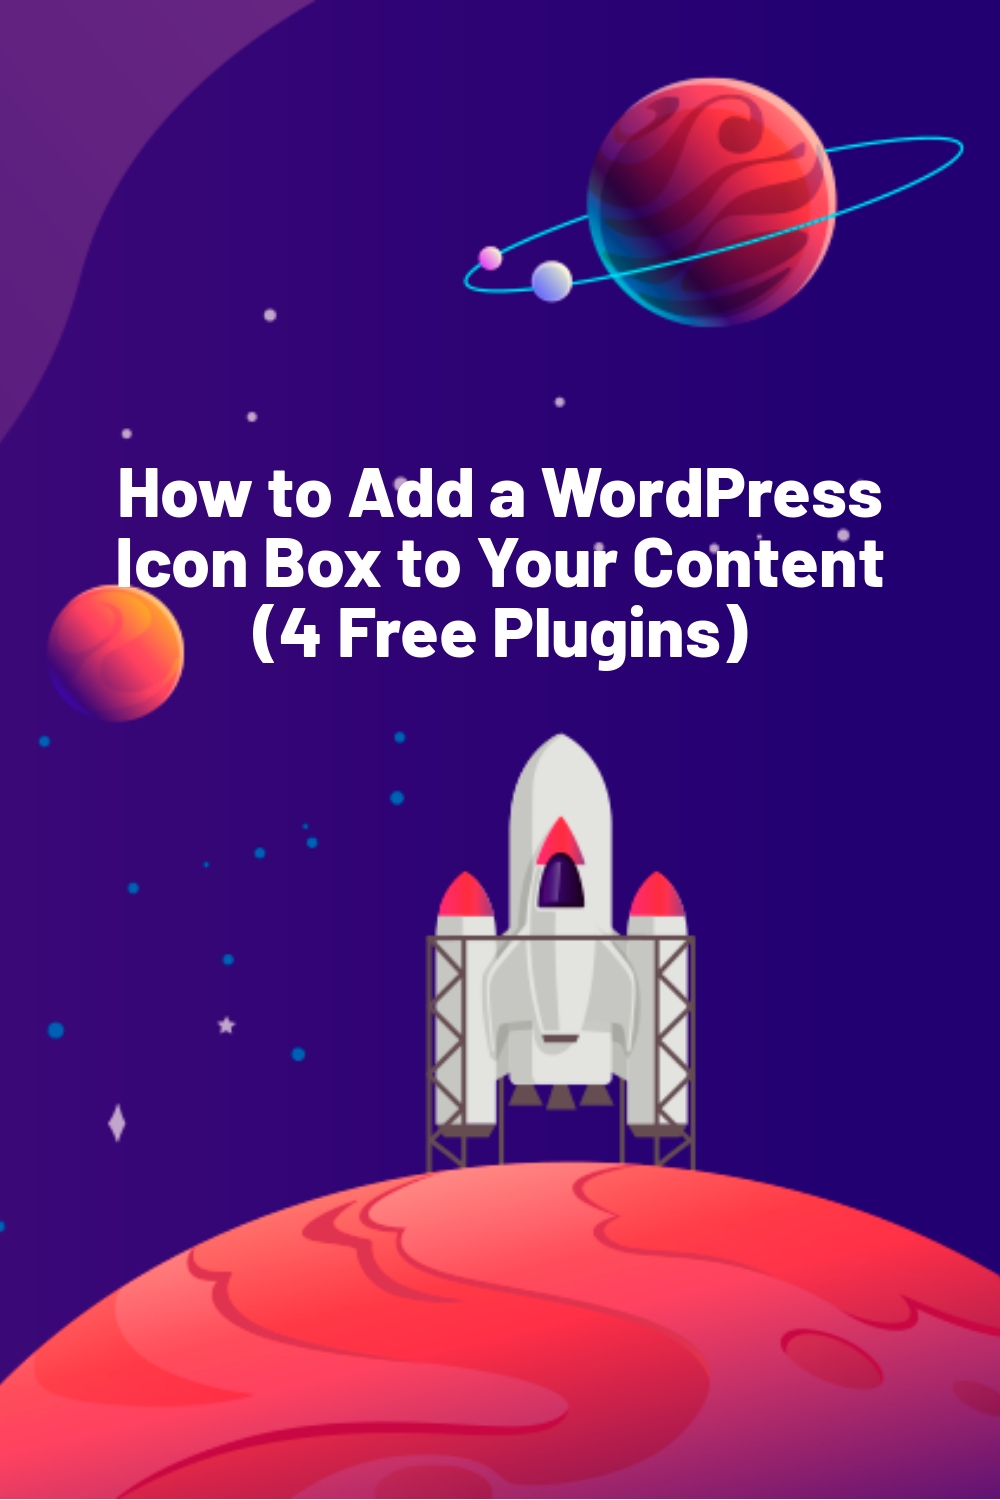 How to Add a WordPress Icon Box to Your Content (4 Free Plugins)